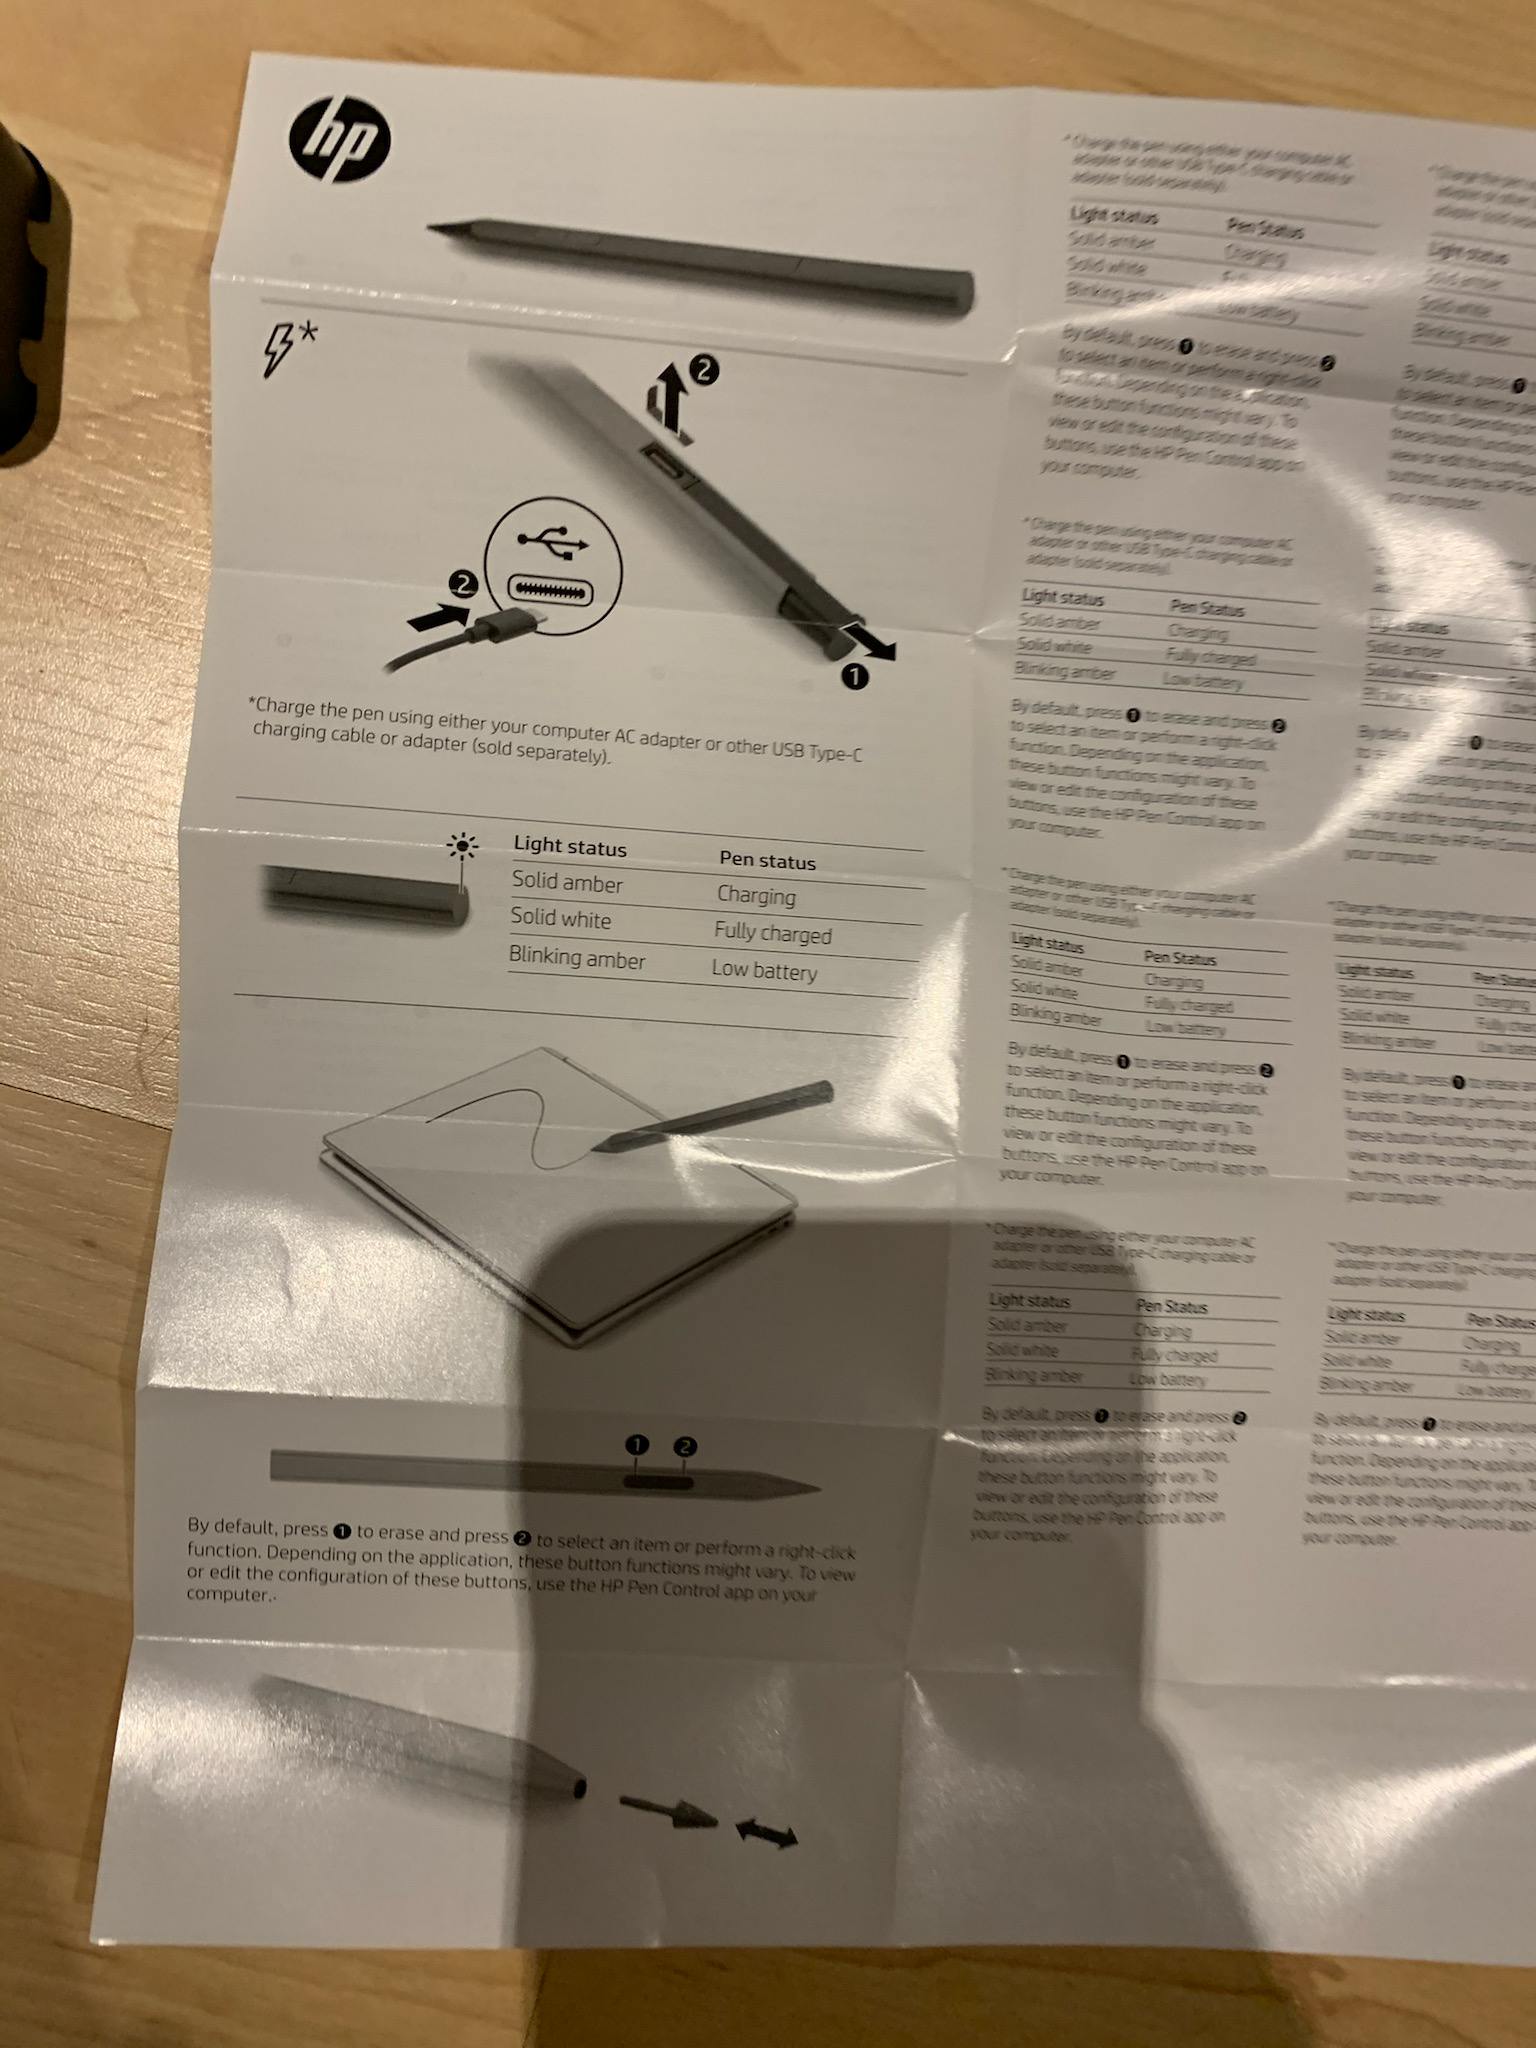 Solved: Spectre x360 15 pen not working (light and charging) - HP Support  Community - 7801384